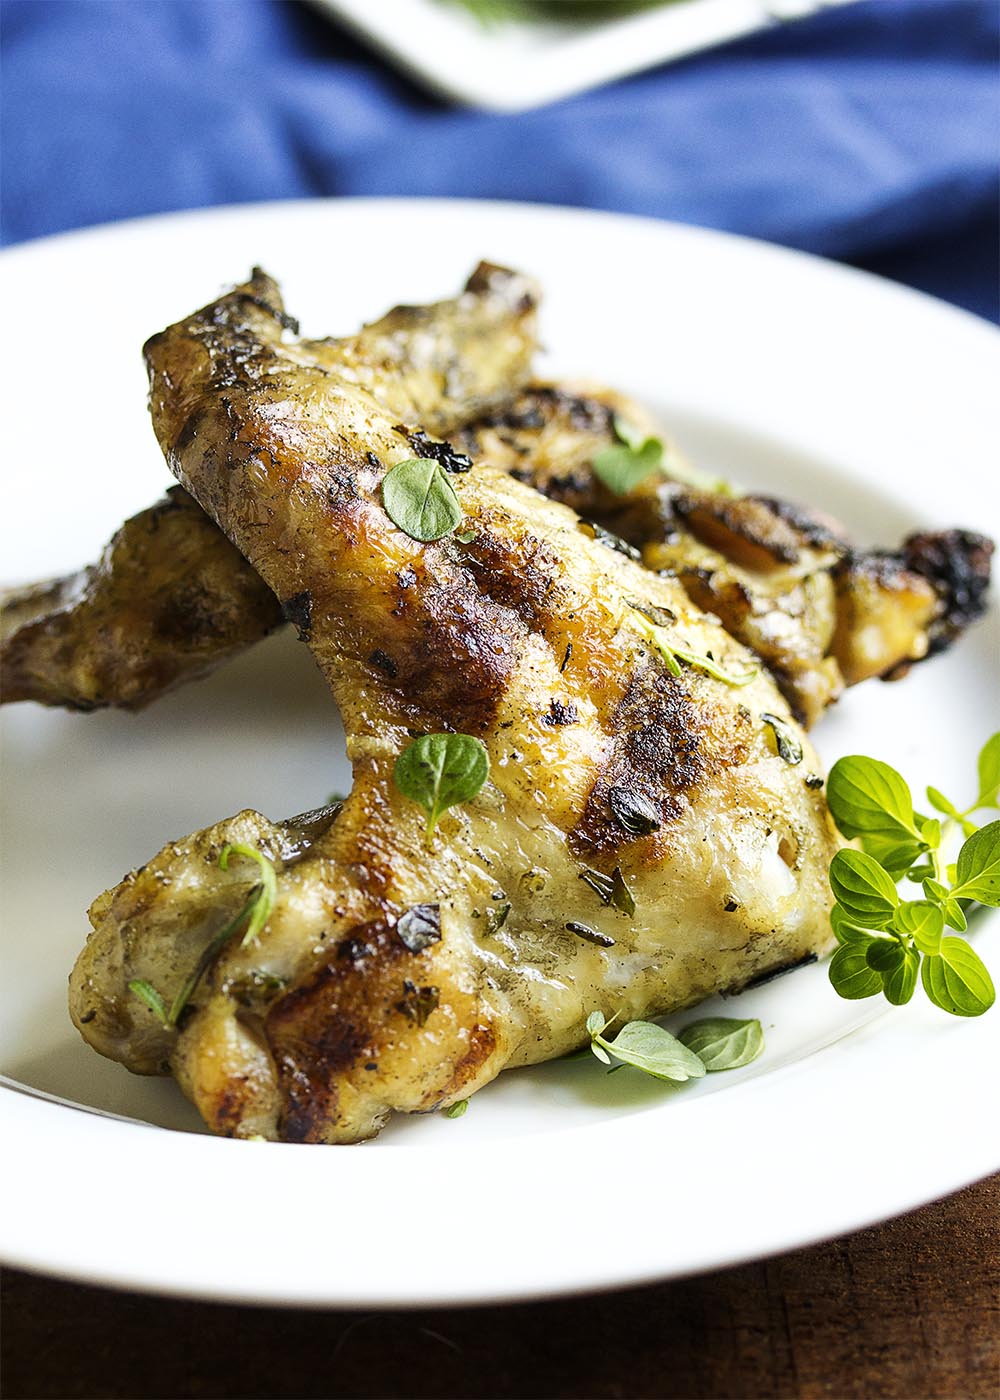 Herb Marinated Grilled Chicken Wings - Grilled chicken wings take on Italian flavors when they are marinated in fresh herbs and lemon and then grilled to crispy perfection. Great for cookouts! | justalittlebitofbacon.com